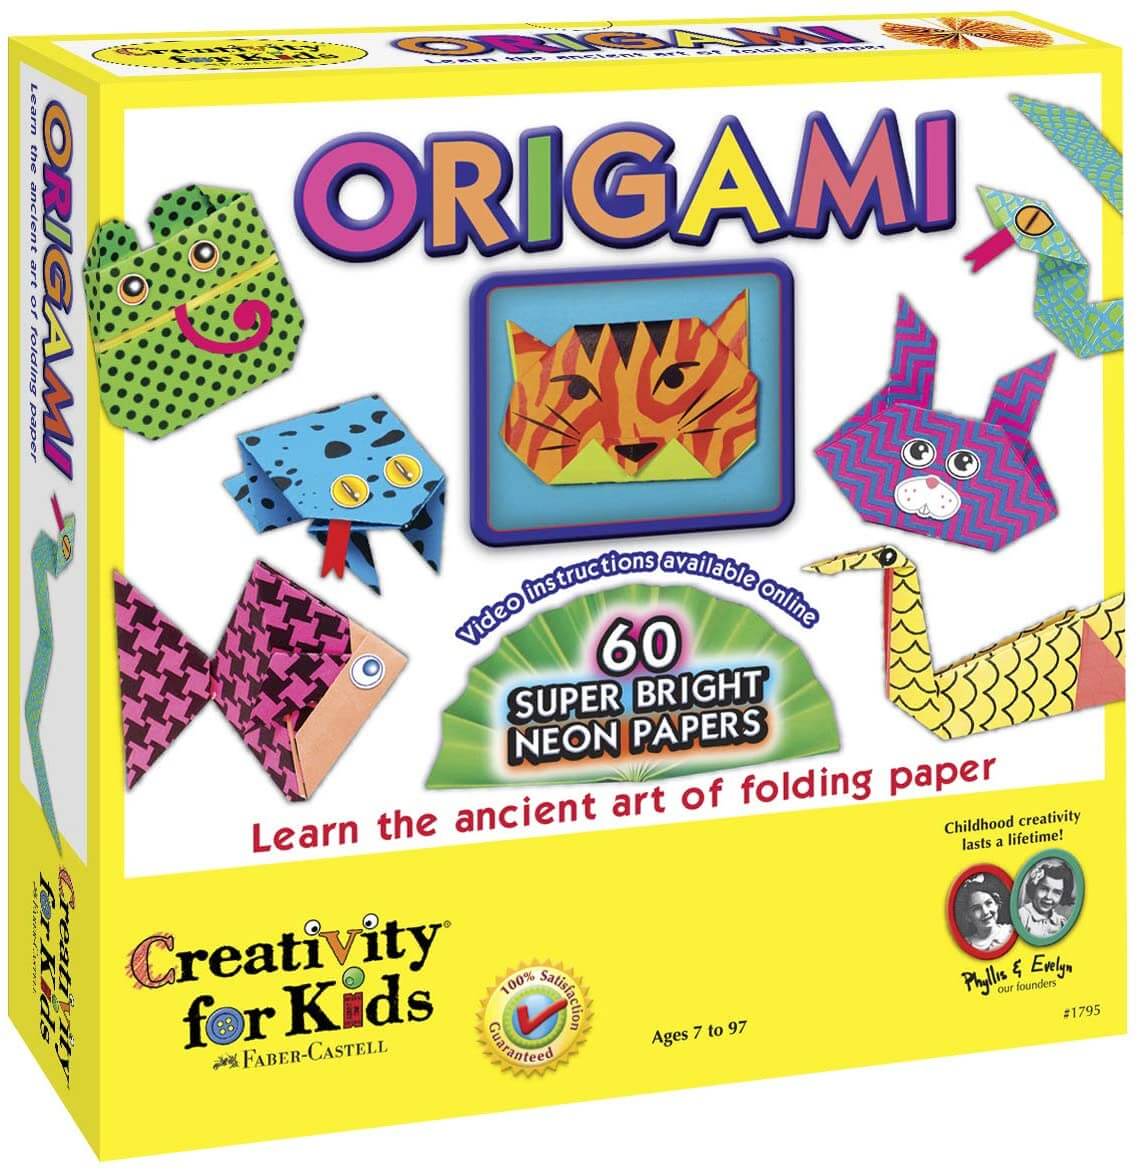 Creativity for Kids- Origami Paper Craft Kit